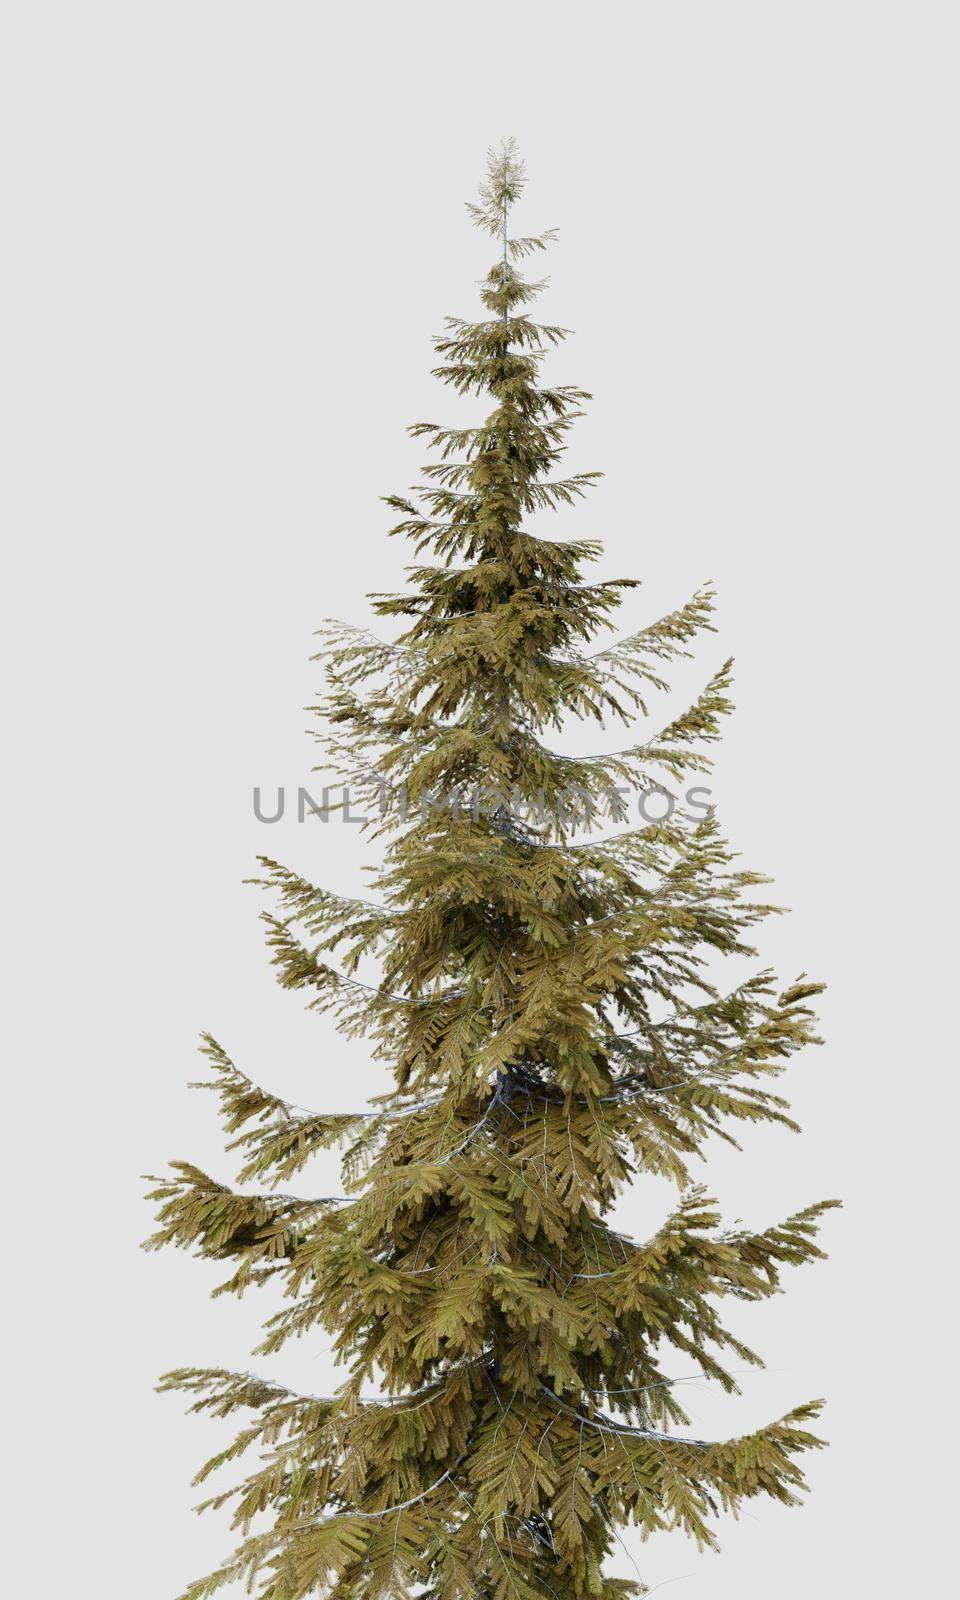 Treetop of Abies guatemalensis pine tree on isolated white background. Nature and object concept. 3D illustration rendering by MiniStocker